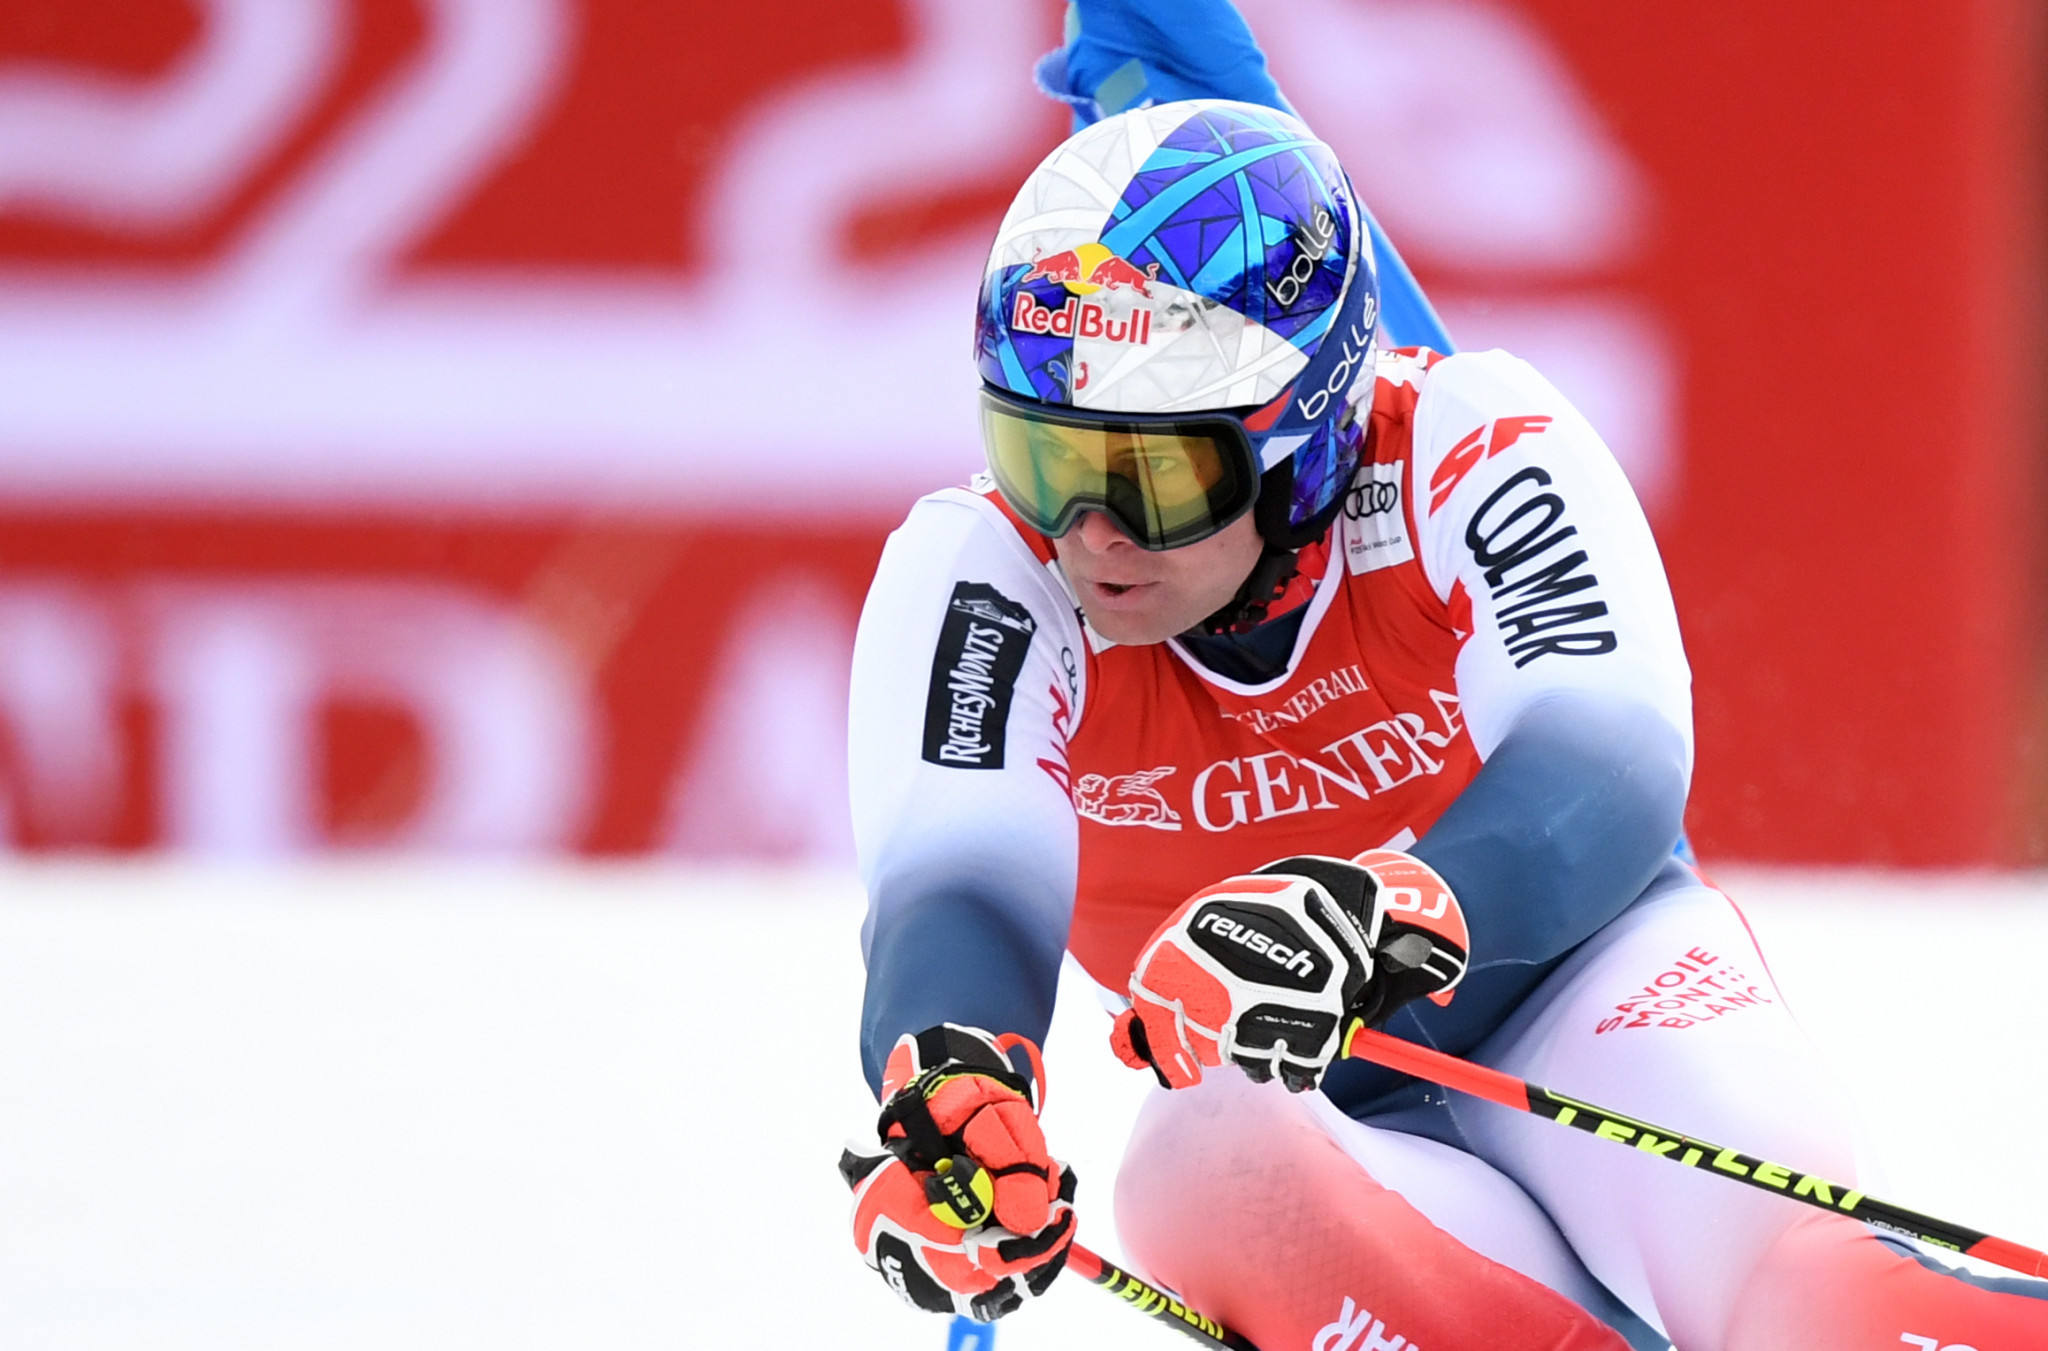 Pinturault second in overall standings after second giant slalom win of World Cup season